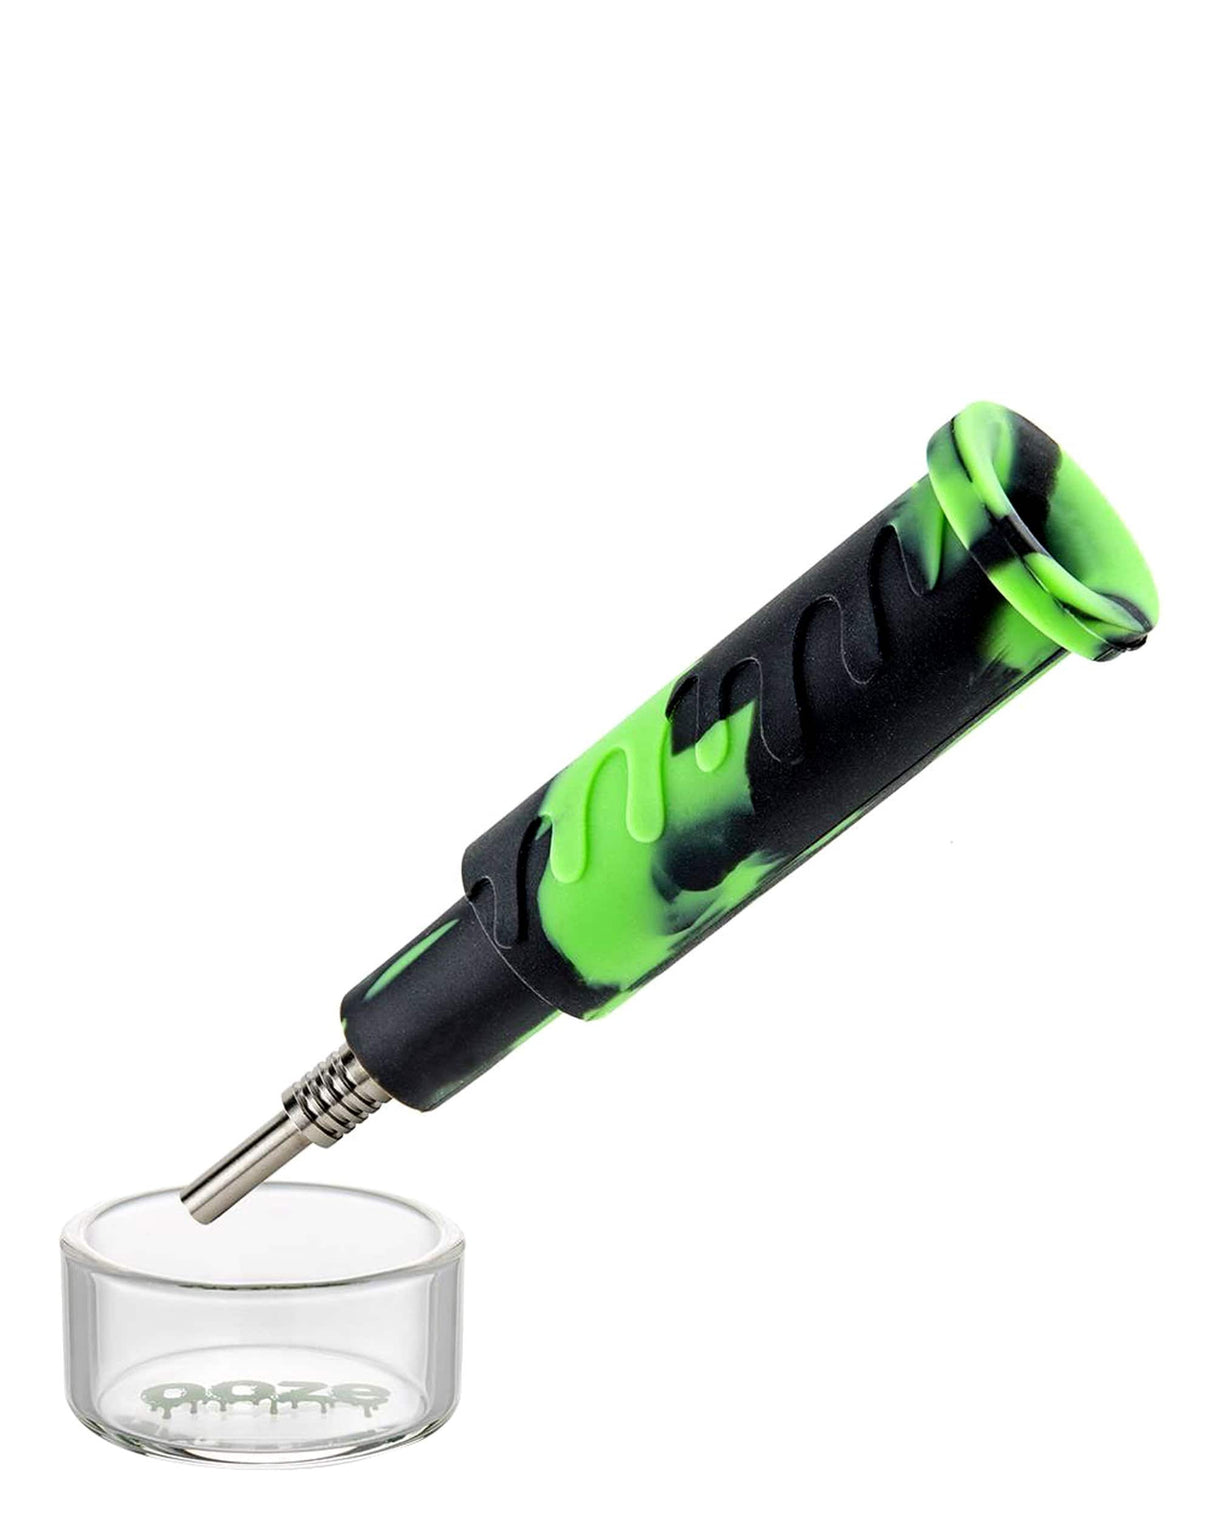 Ooze Cranium Bong & Dab Rig in Black/Green, Silicone Body with Quartz Nail, Front View